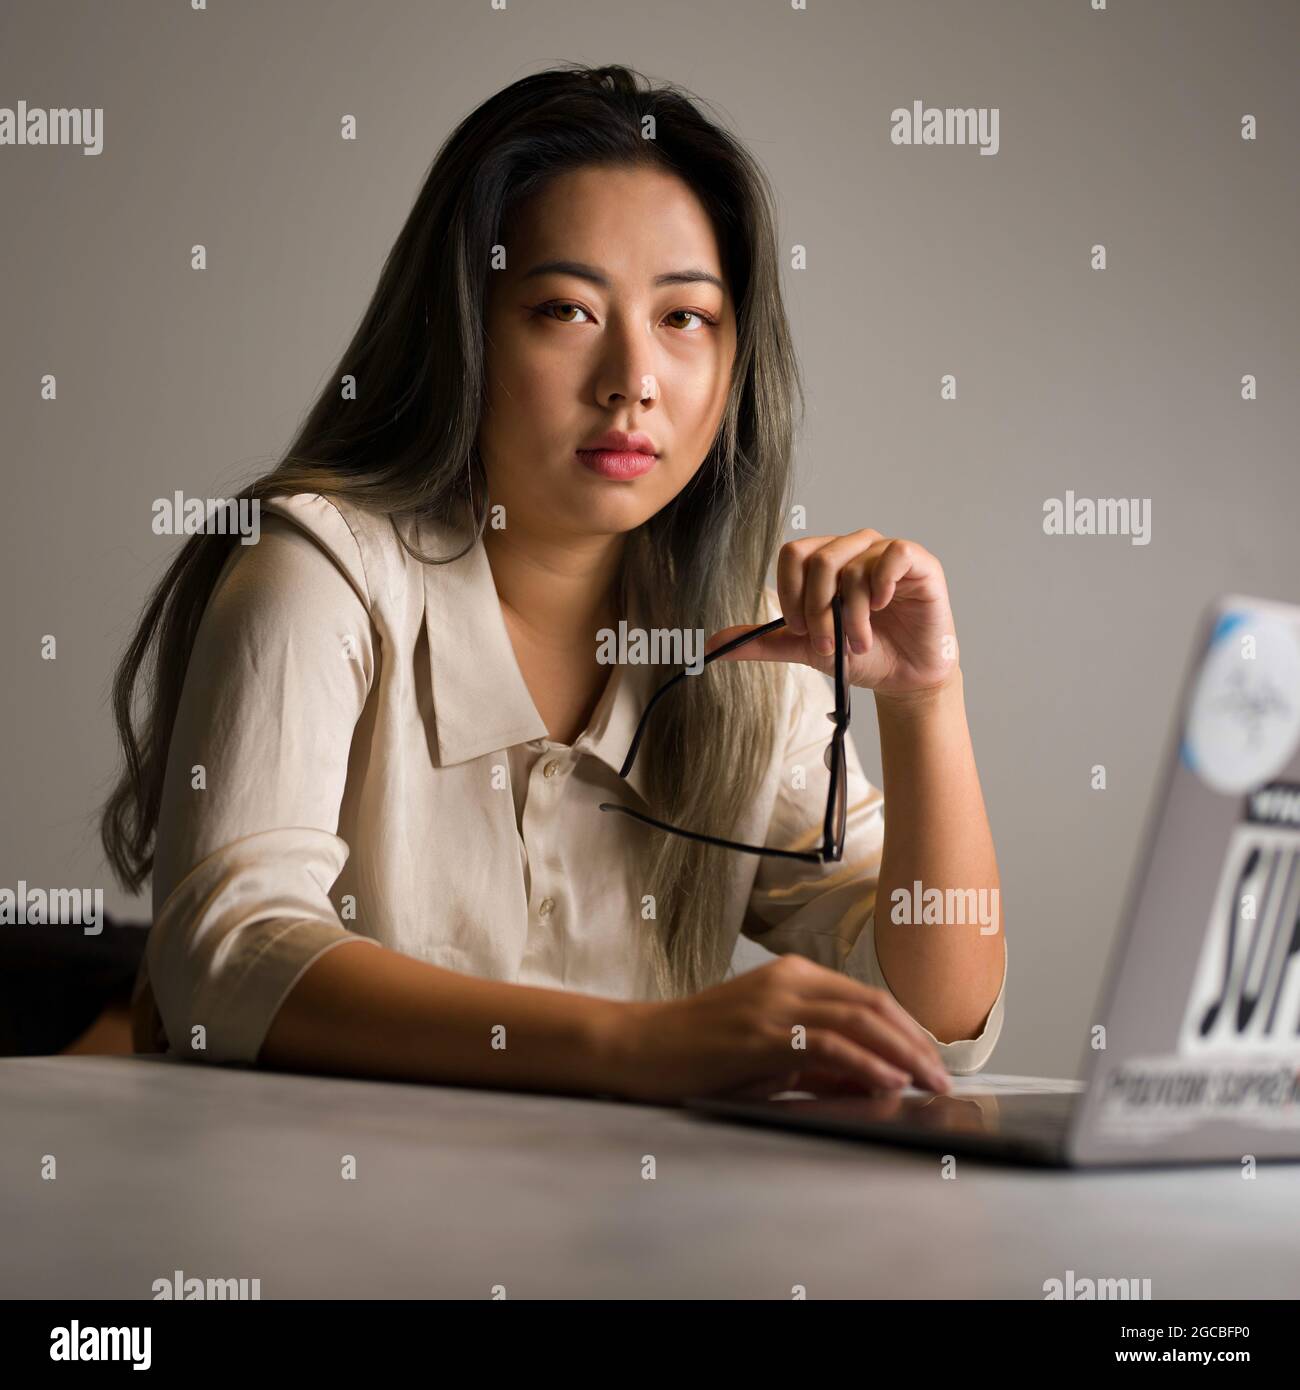 Young Asian Female Authentic Data Scientist working on an Analytics Problem Stock Photo